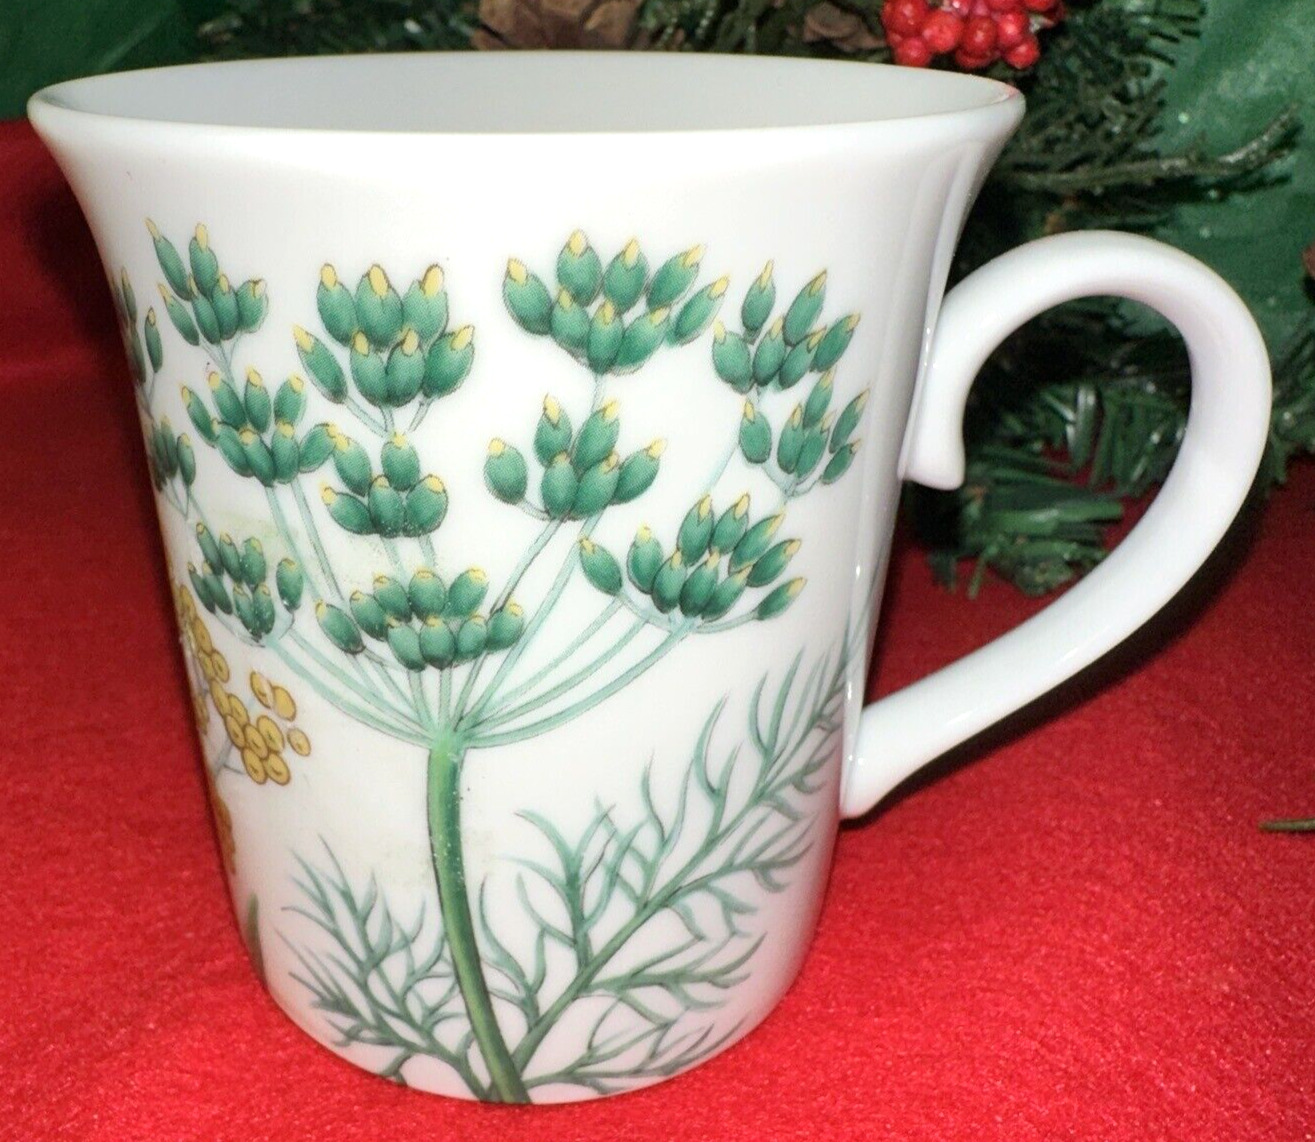 1x Horchow Ceramic Tea Cup Queen Anne's Lace Dill Goldenrod Pattern